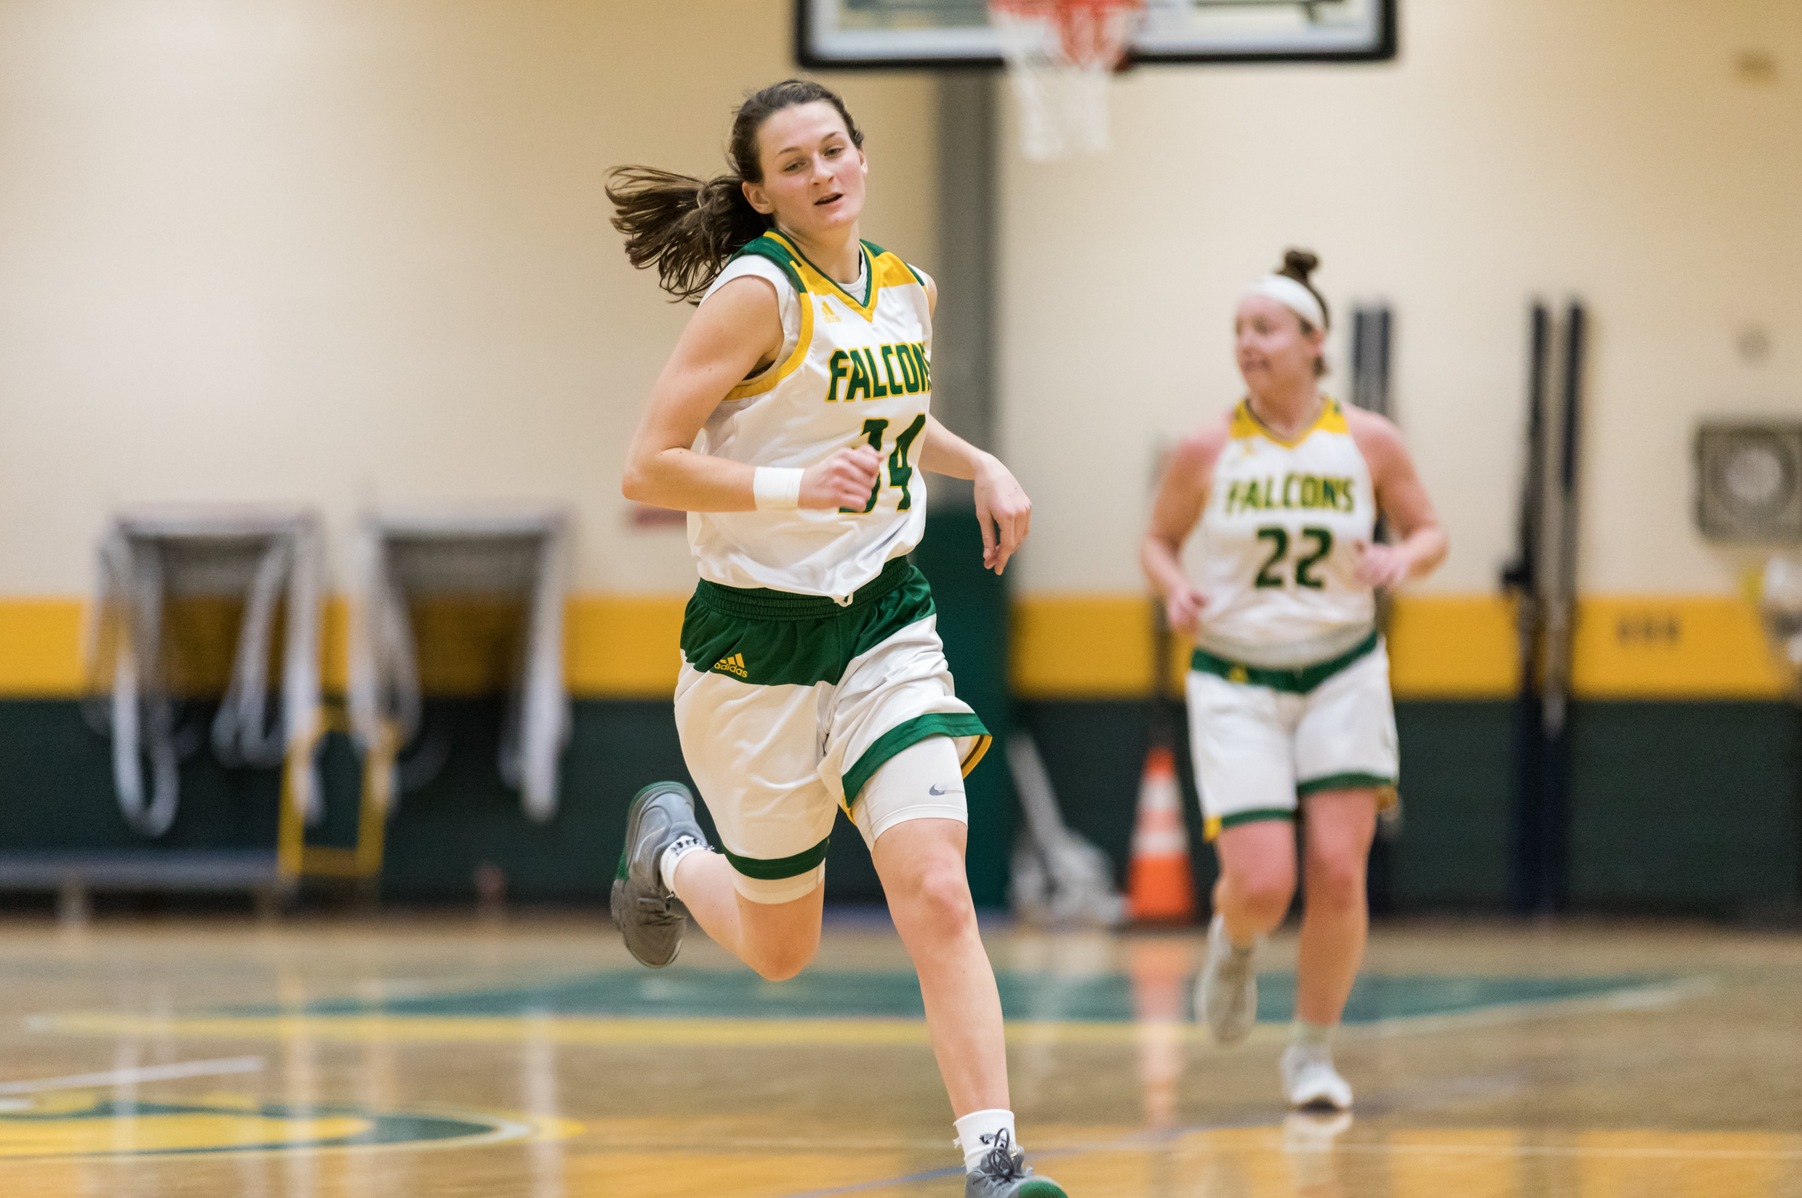    Falcons Fall to Trailblazers in MASCAC action, 74-56